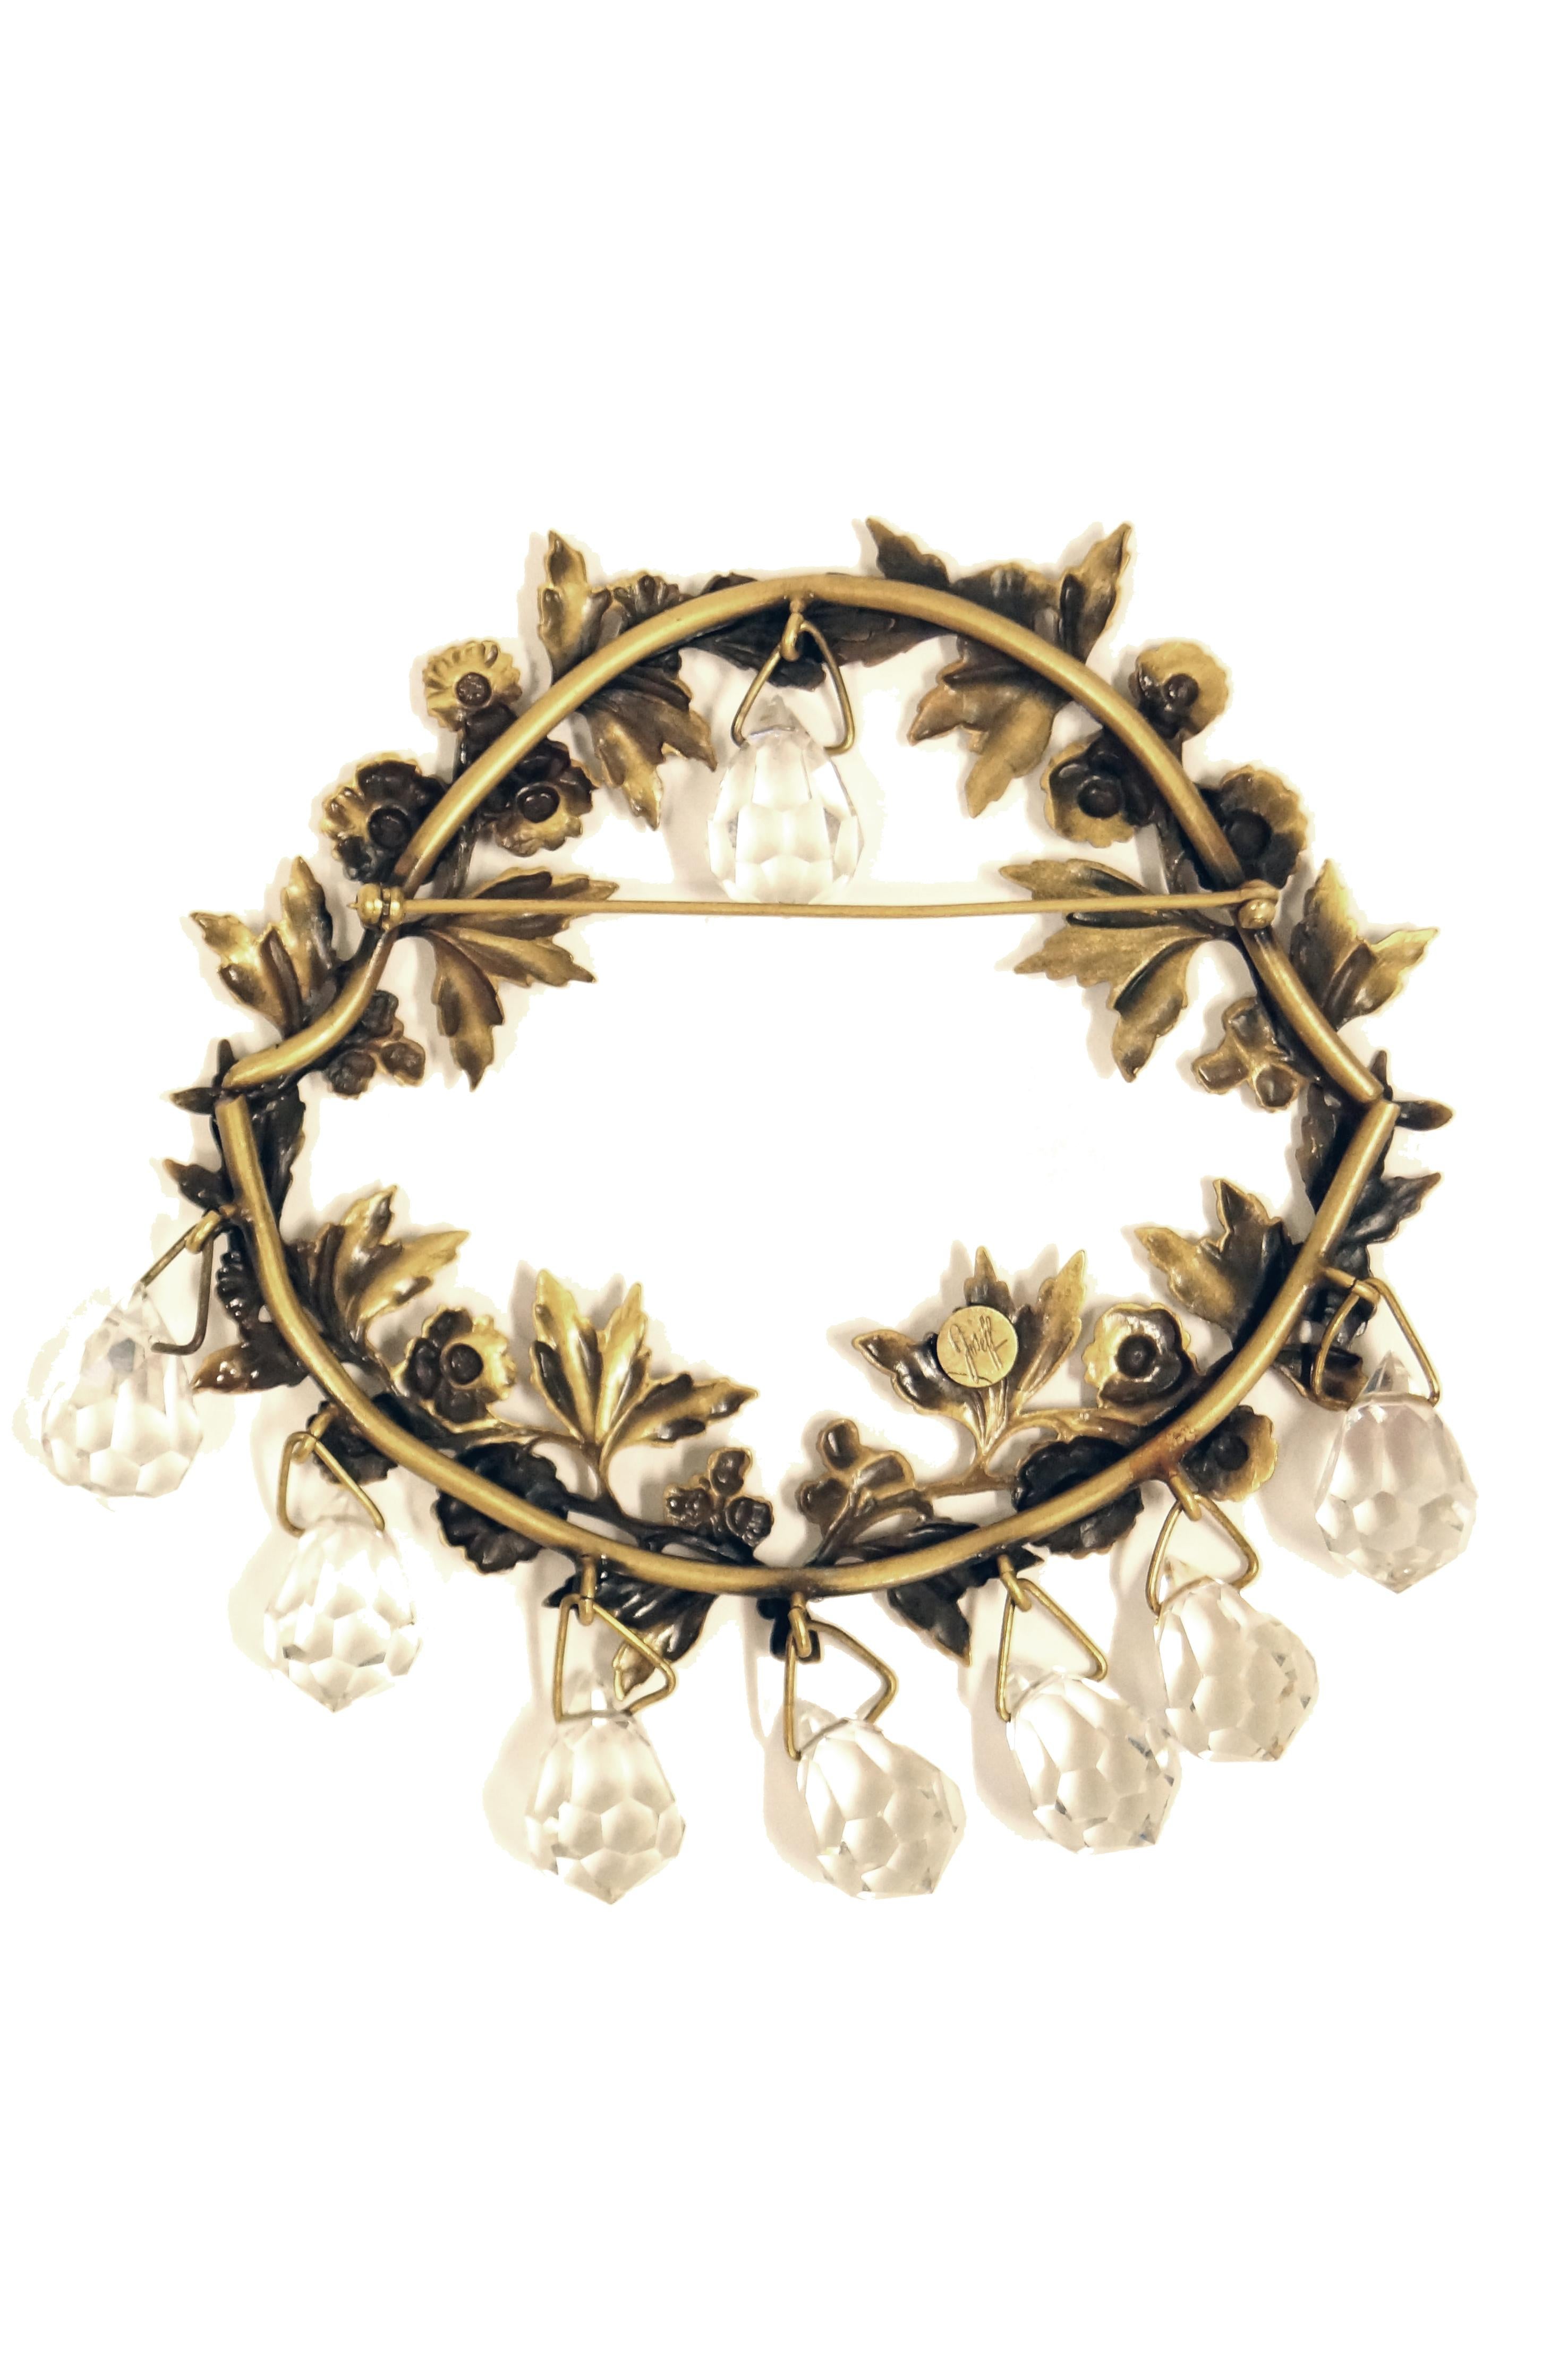  1940s Joseff of Hollywood Chandelier Floral Wreath Brooch in Russian Gold Fin For Sale 1